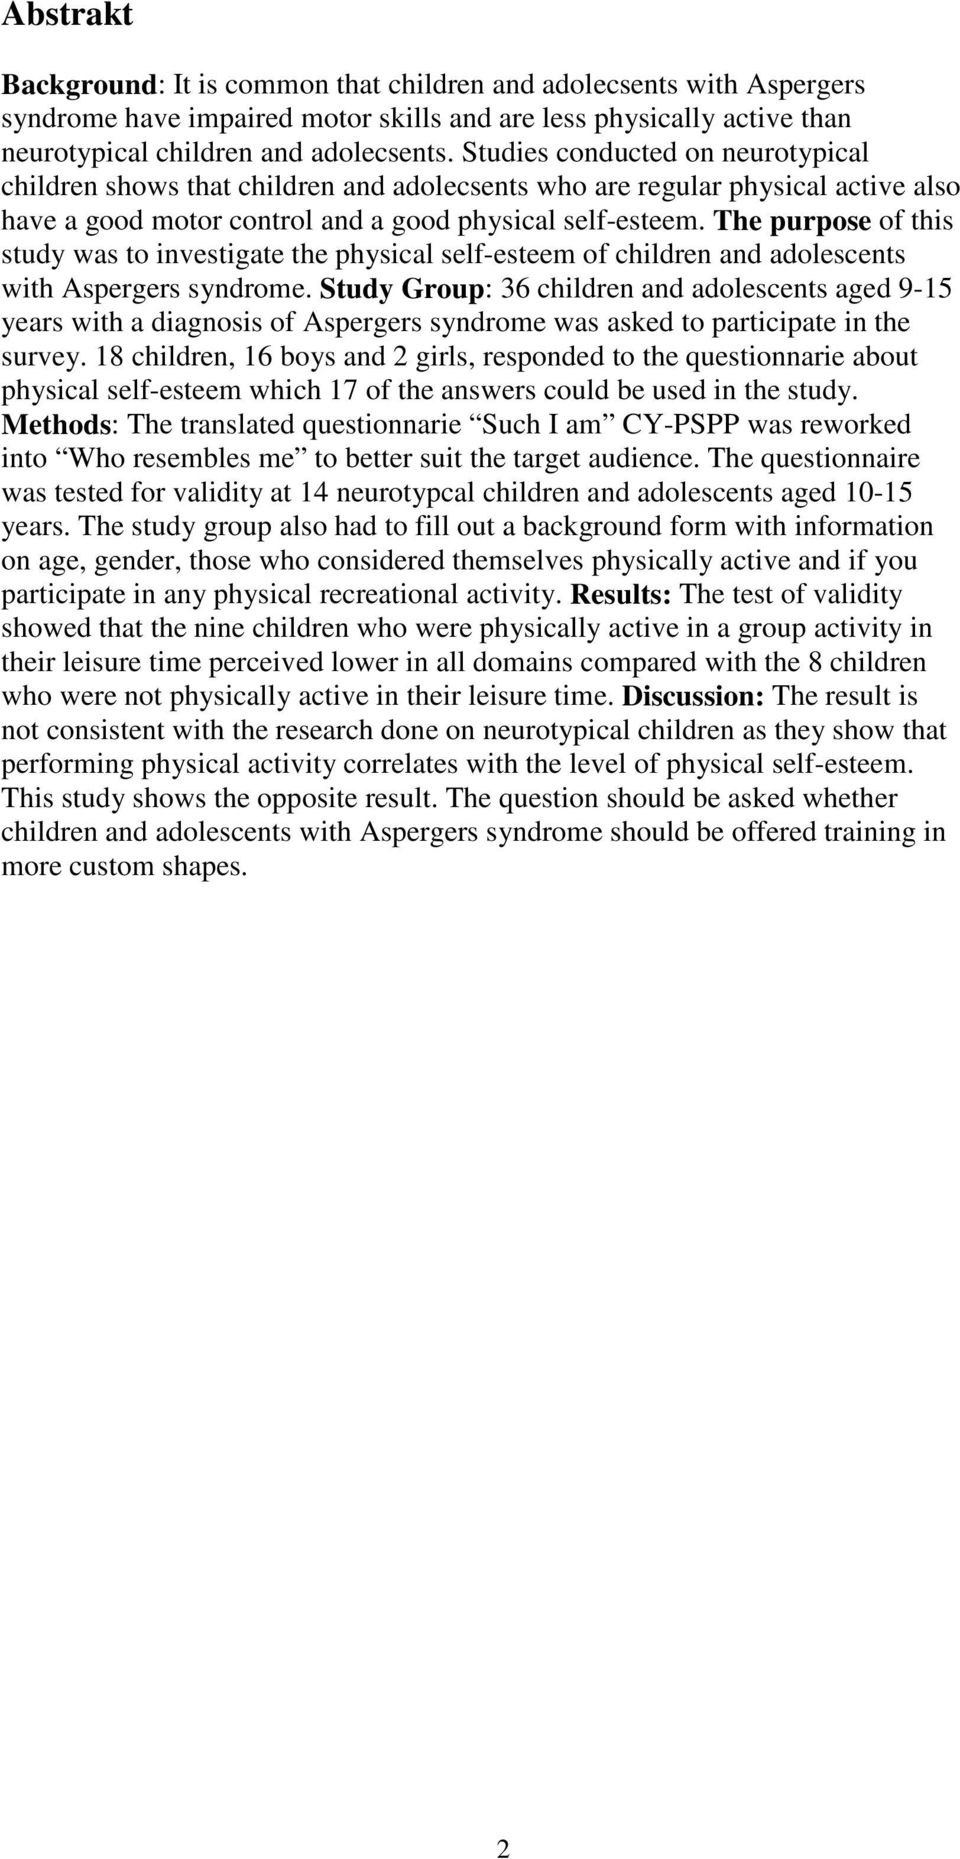 The purpose of this study was to investigate the physical self-esteem of children and adolescents with Aspergers syndrome.